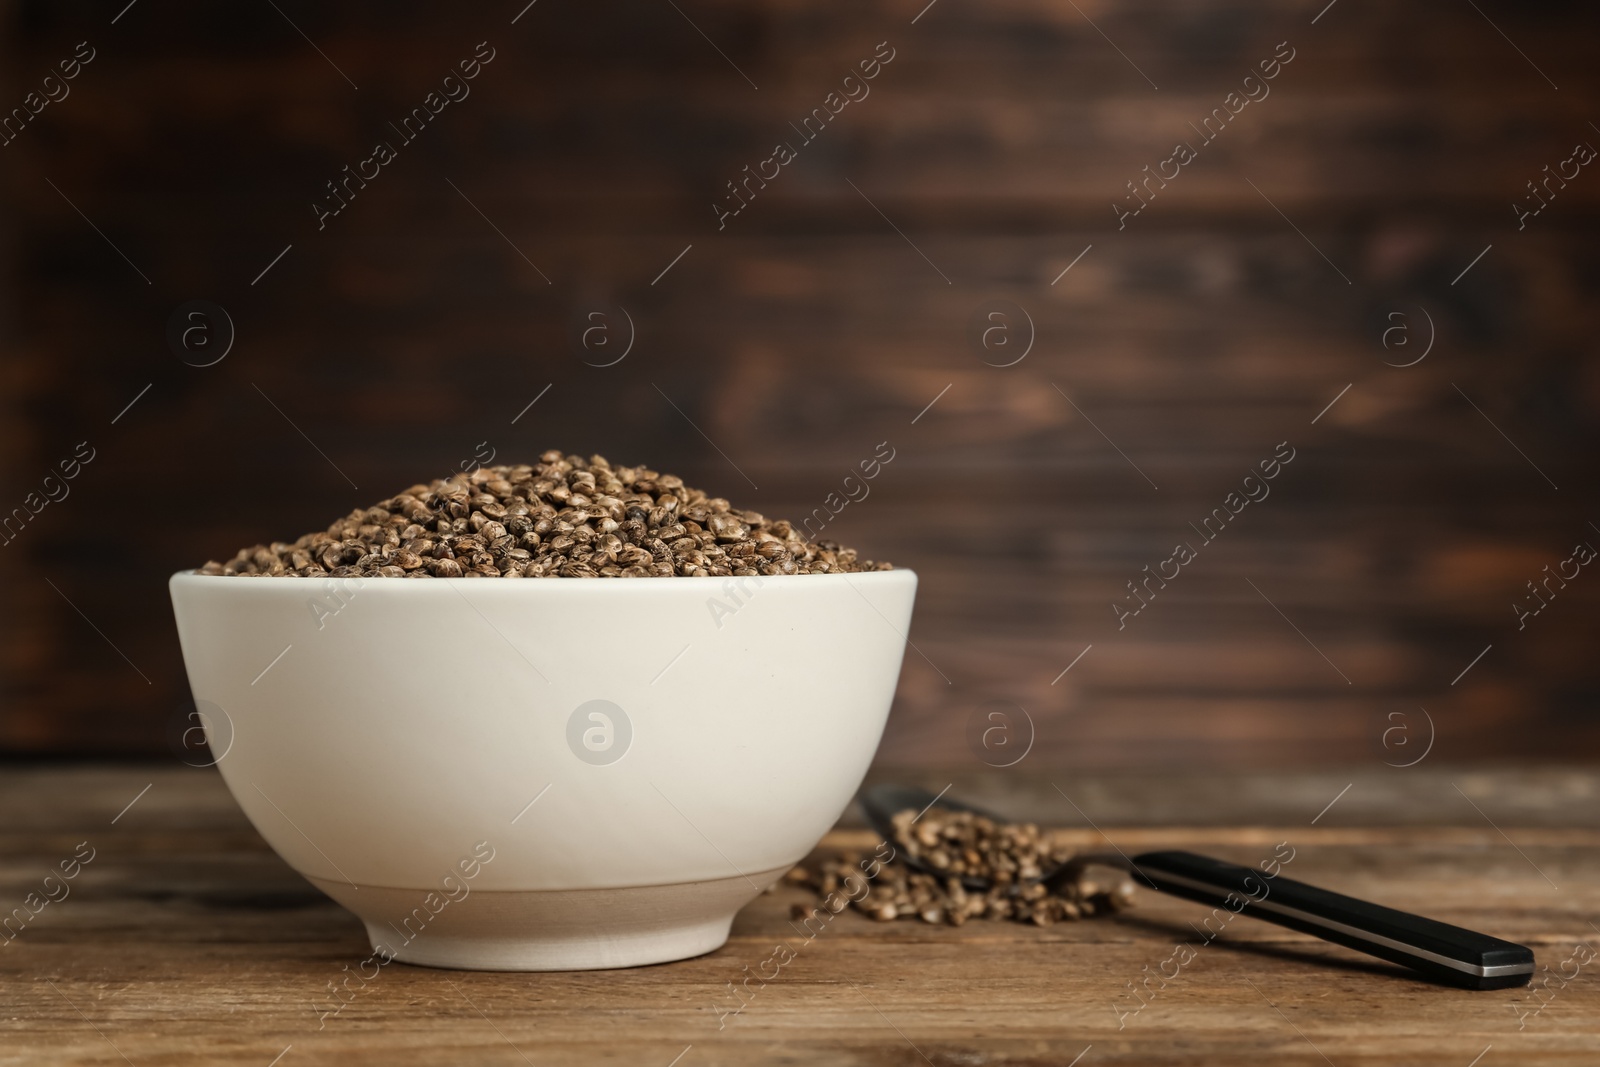 Photo of Ceramic bowl with chia seeds on wooden table, space for text. Cooking utensils